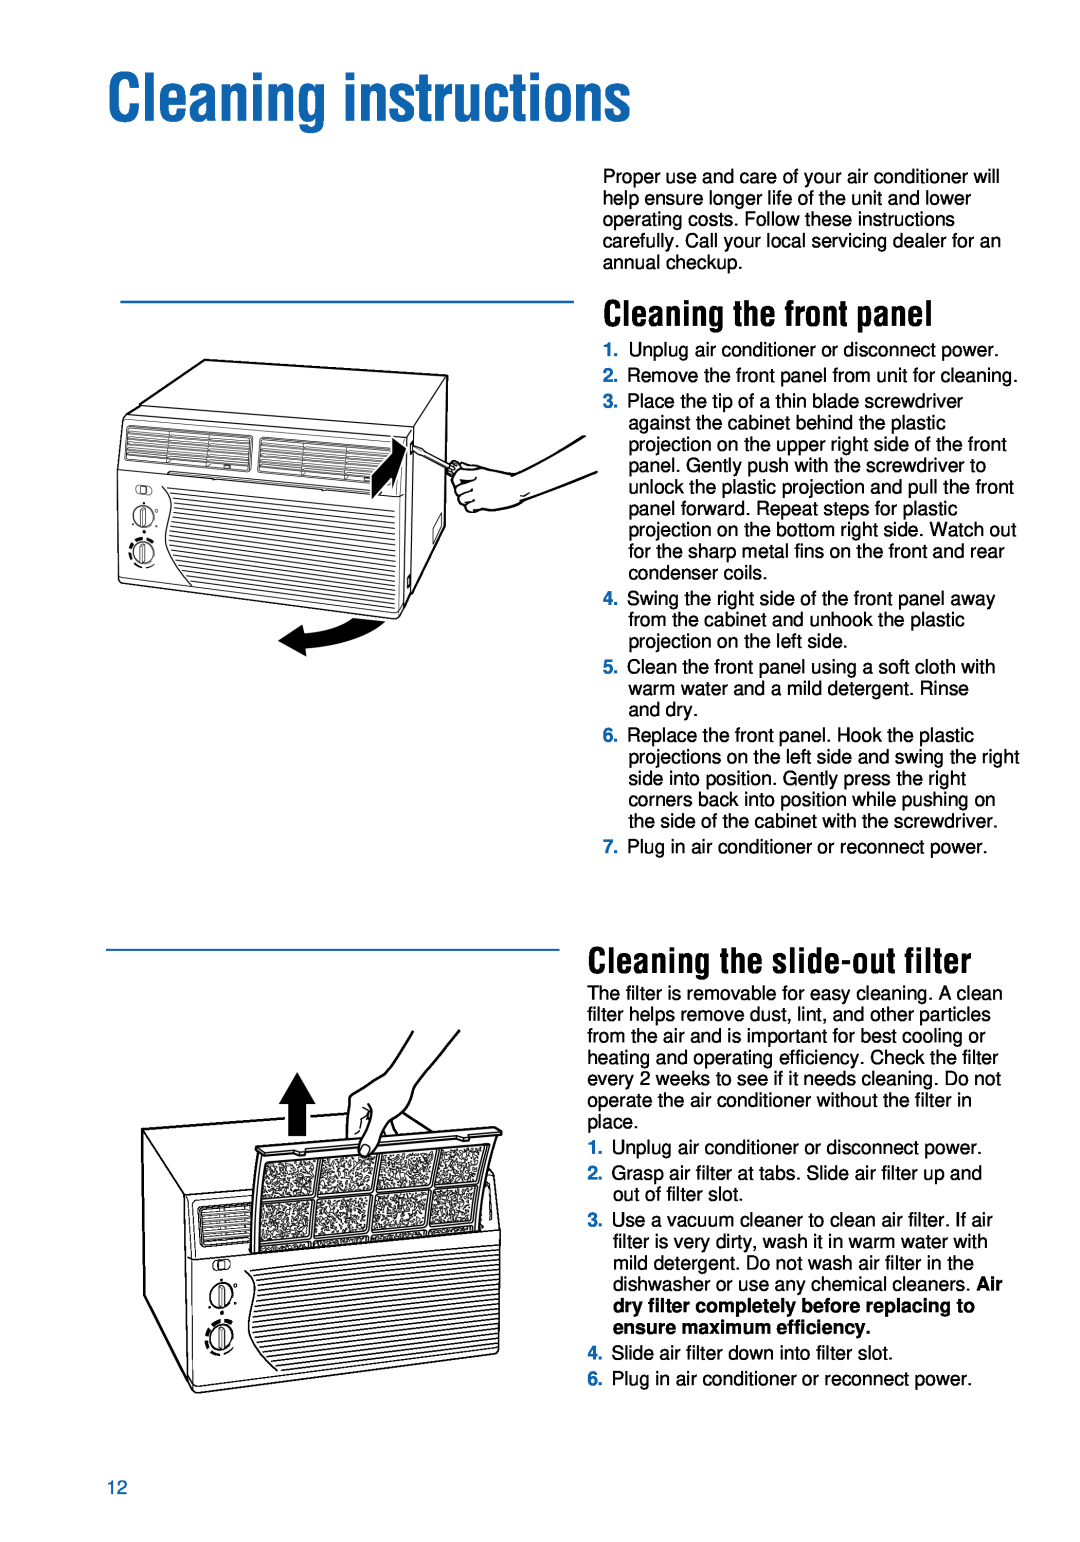 Whirlpool ACU124PK0 installation instructions Cleaning instructions, Cleaning the front panel, Cleaning the slide-outfilter 